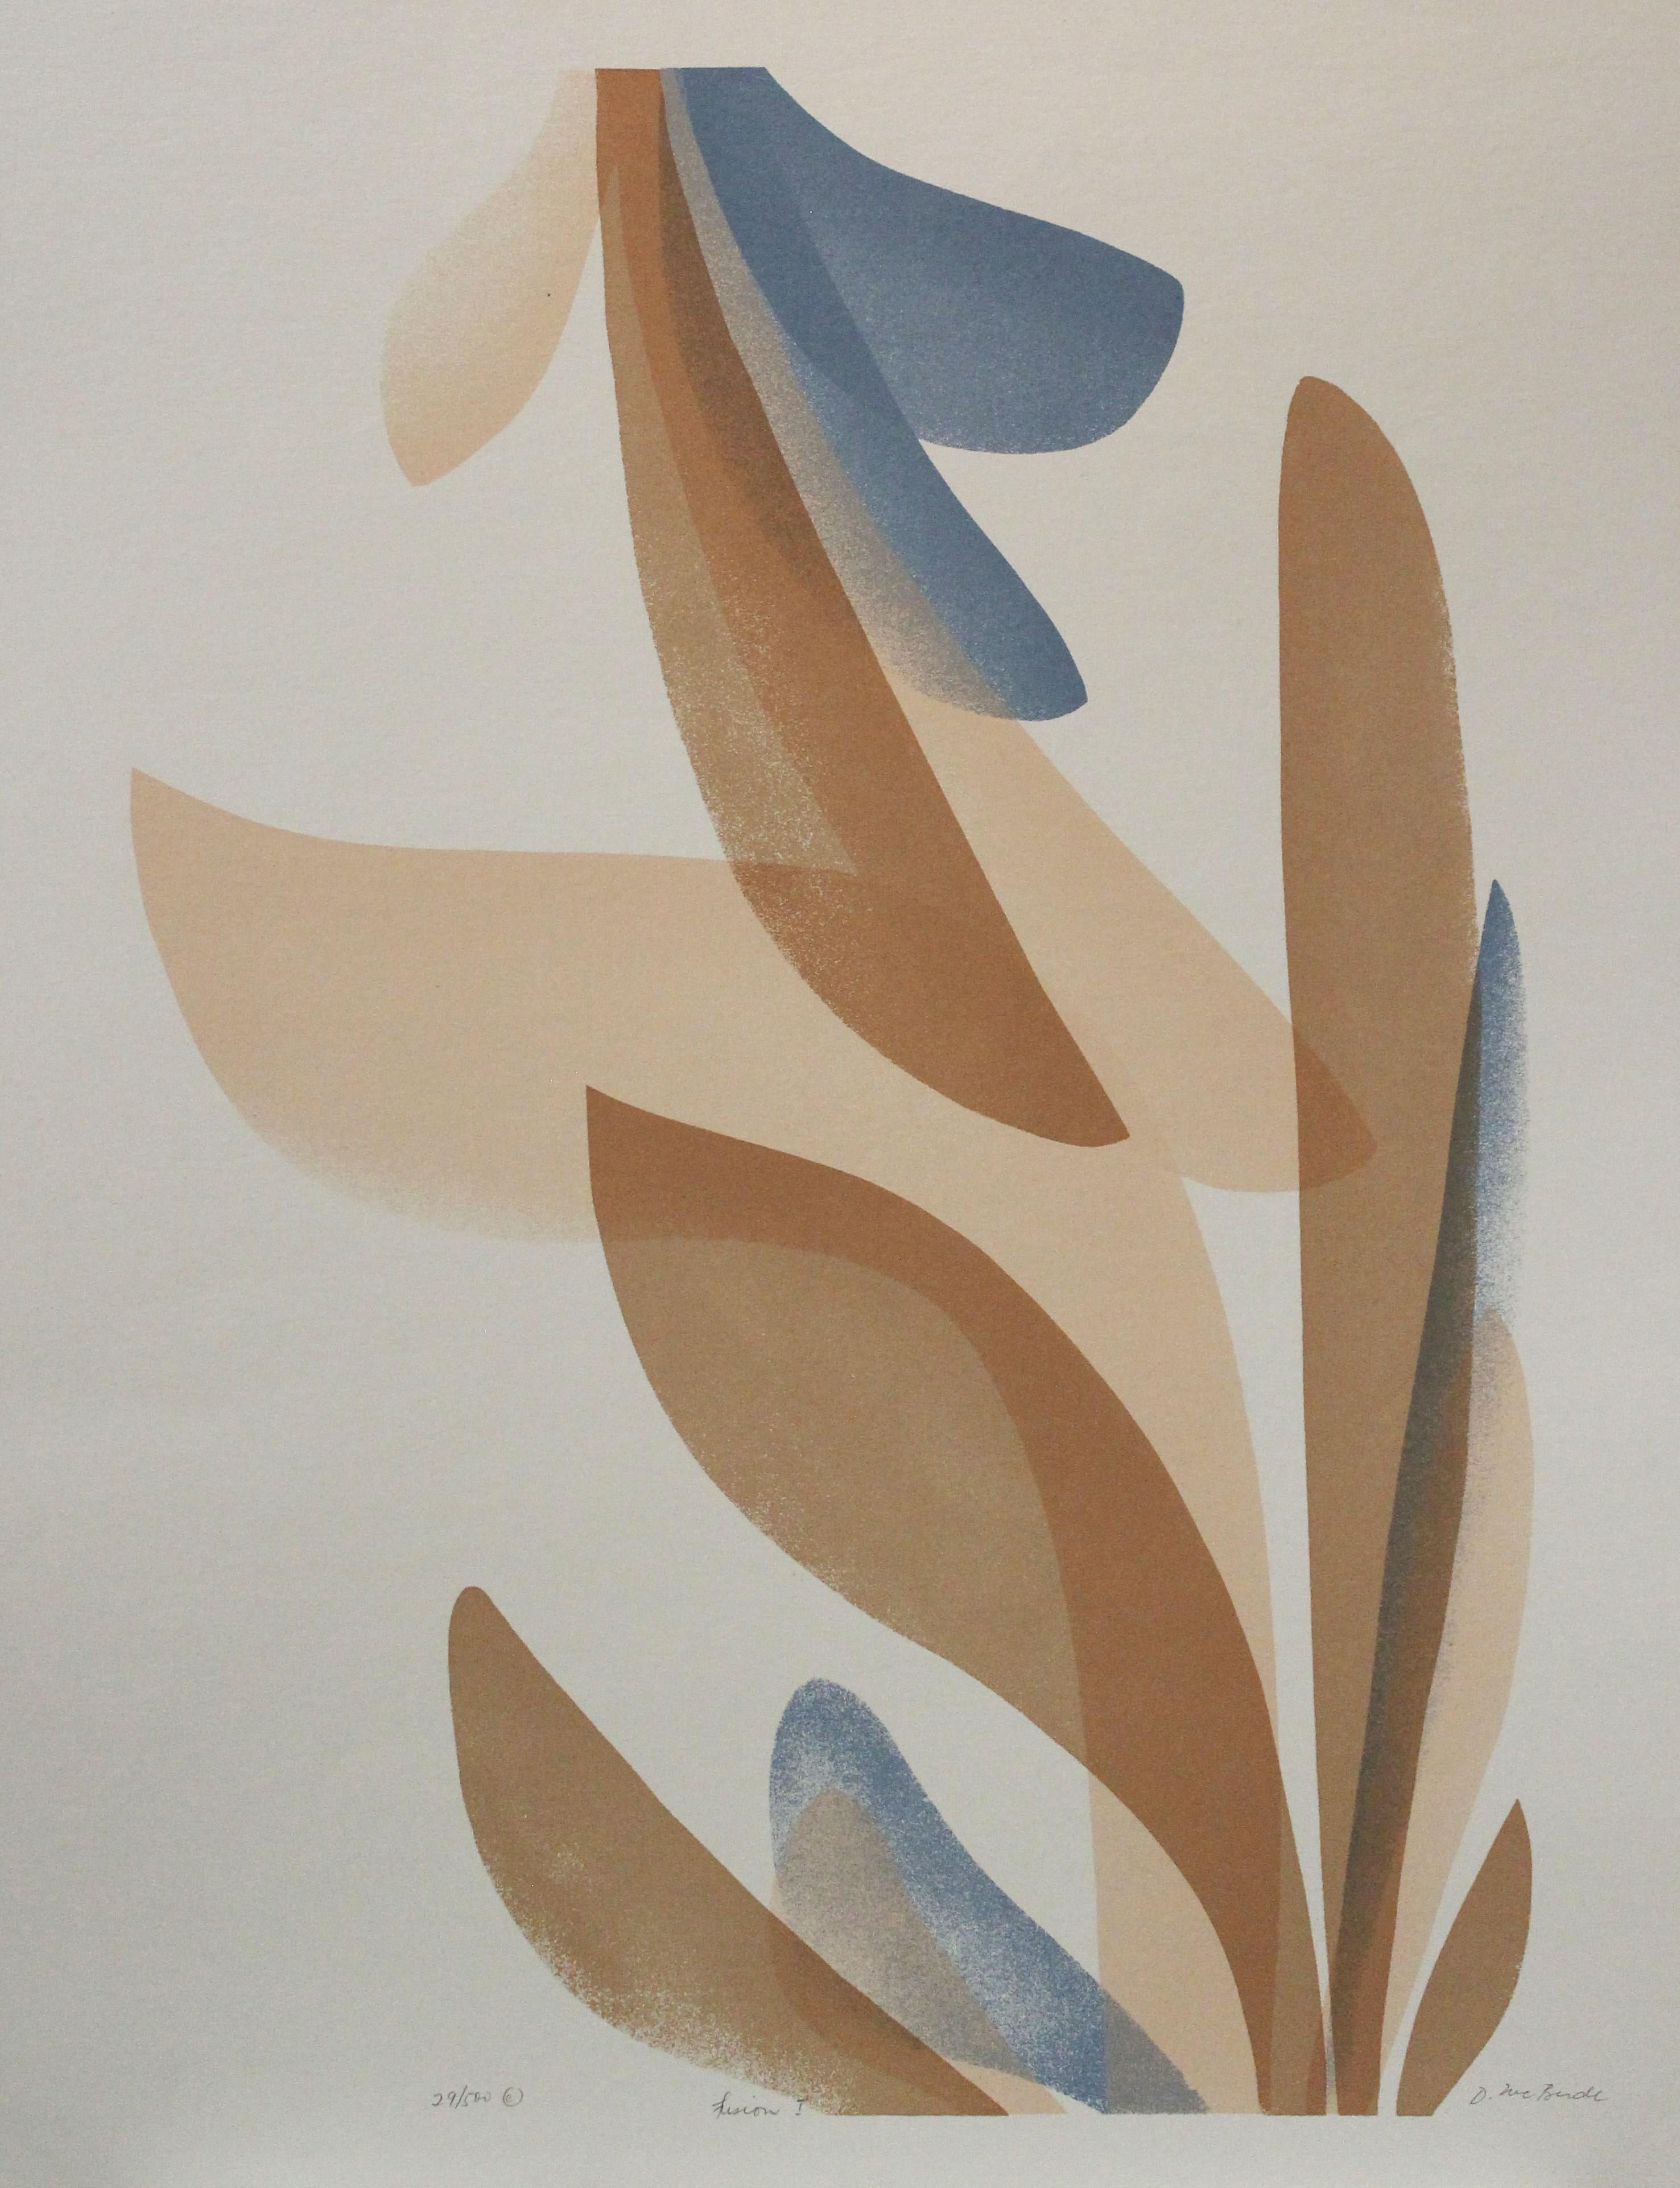 D. McBride Figurative Print - Fusion I (with Blue Leaves)-Limited Edition Print. Signed by the Artist